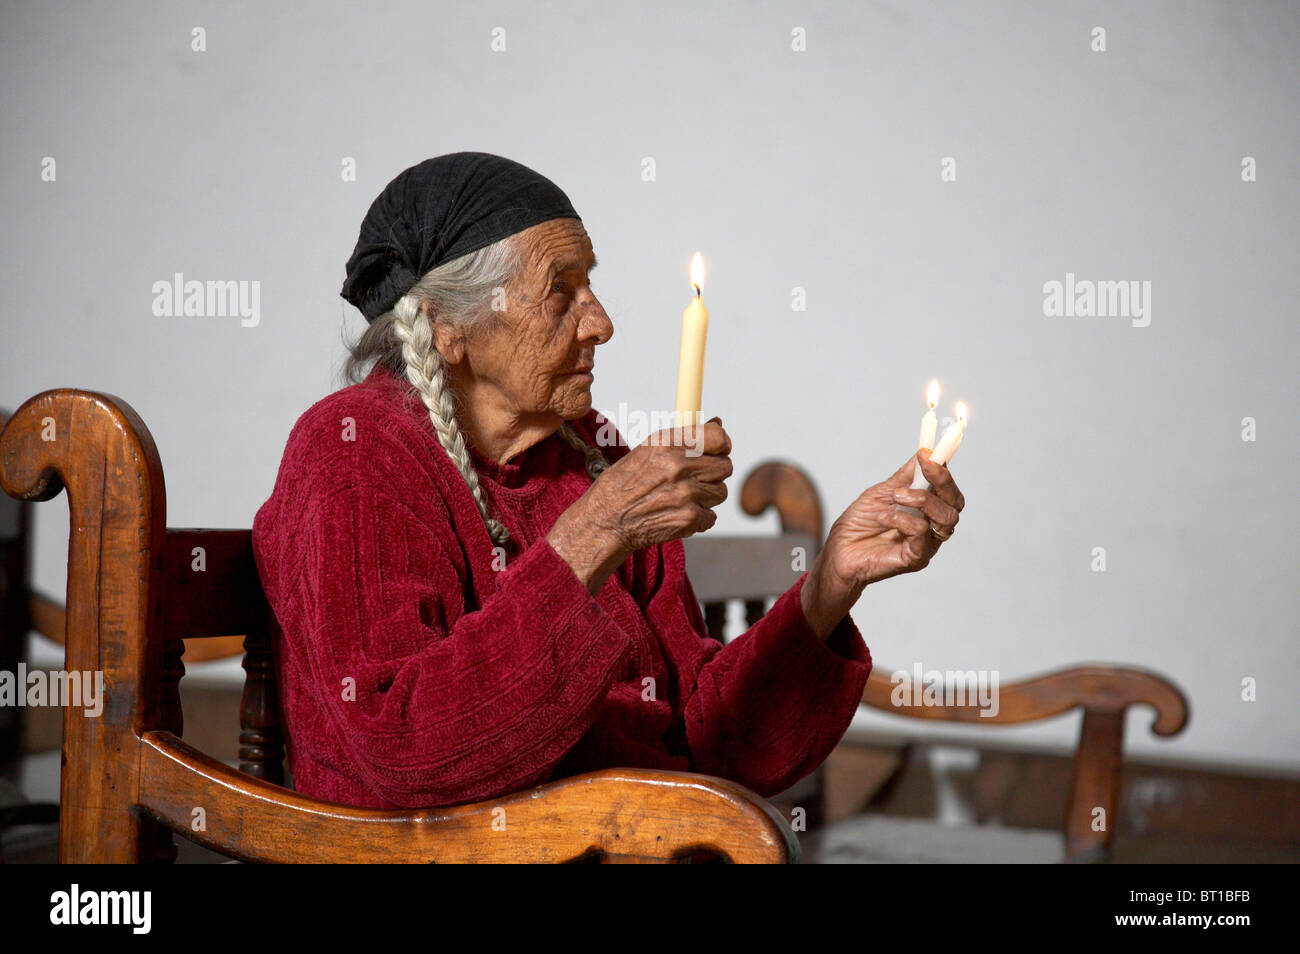 Painet kc4710 woman female women females guatemala holding candles in church of chajul el quiche central america latin Stock Photo